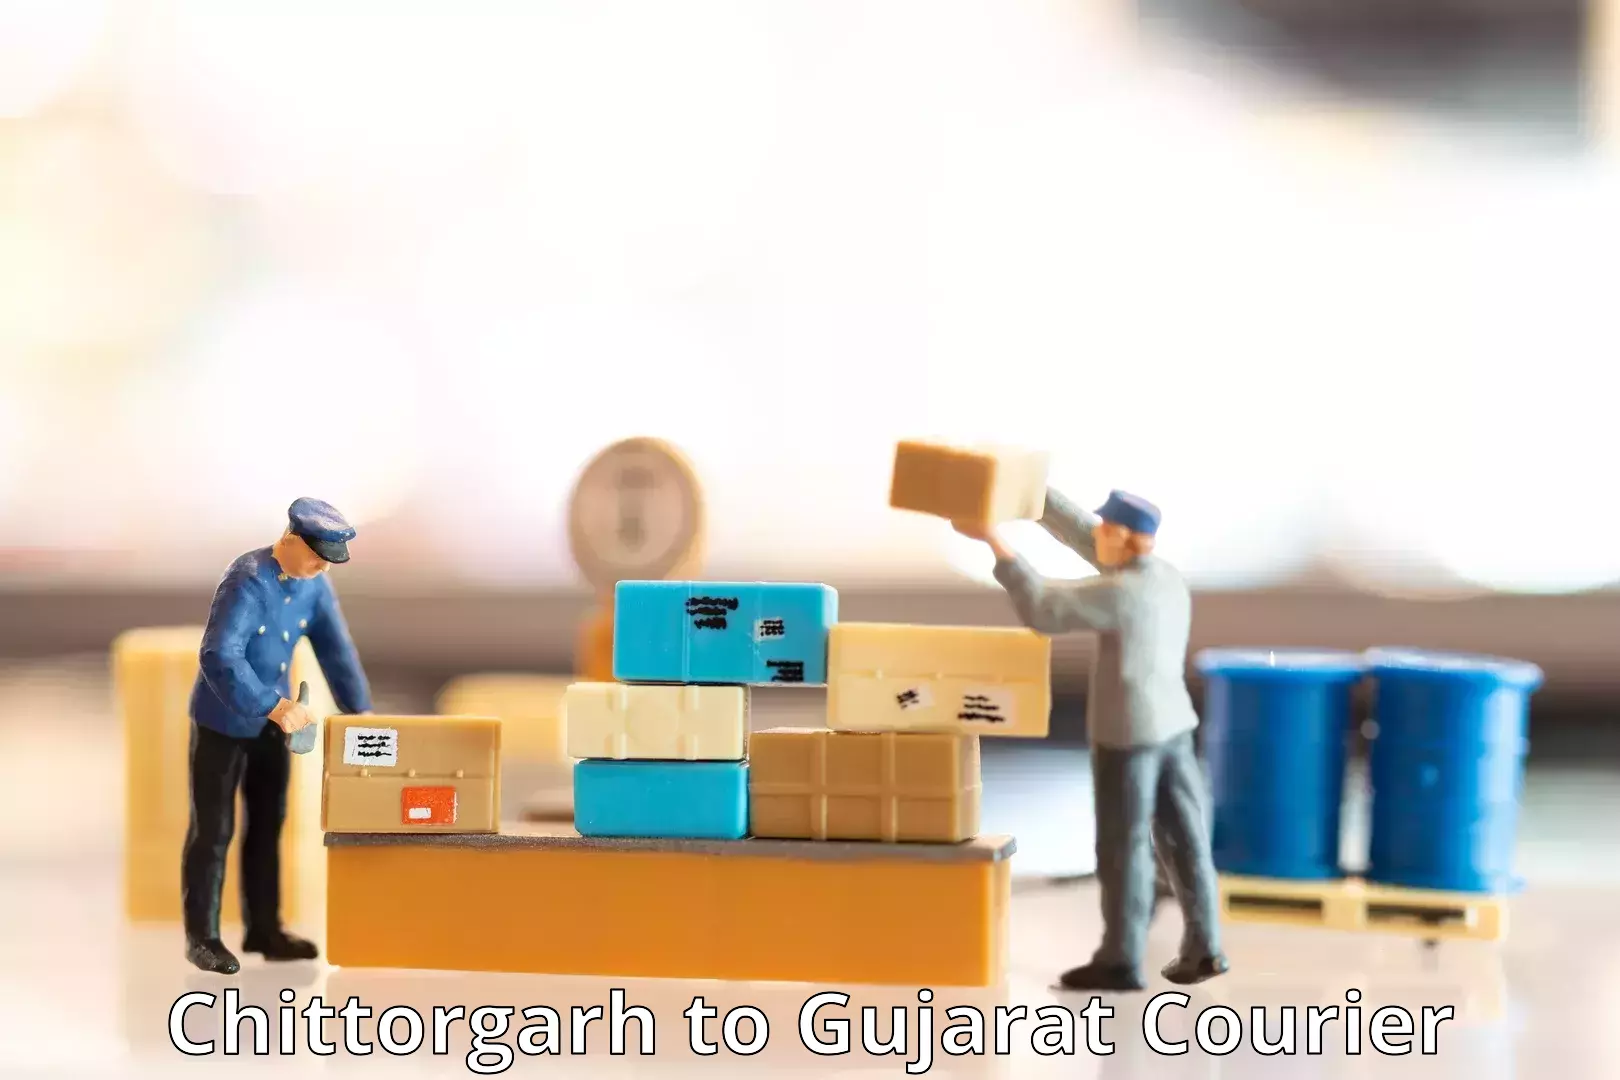 State-of-the-art courier technology Chittorgarh to Shihori